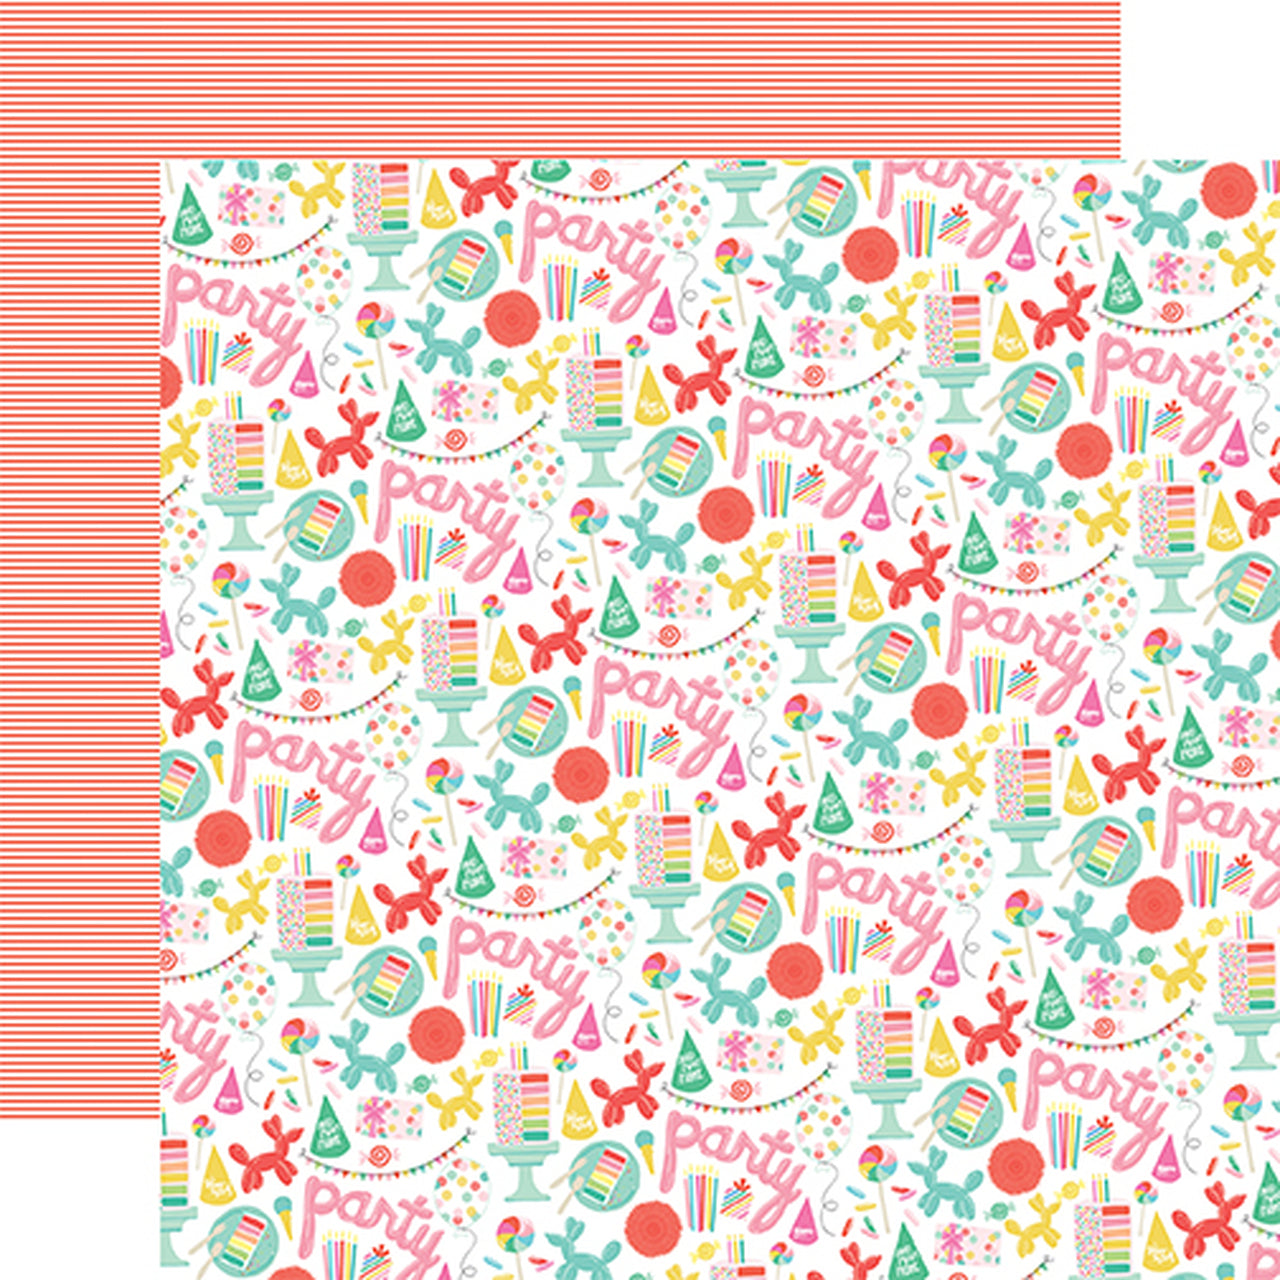 PARTY TIME - double-sided 12x12 cardstock with birthday theme - Echo Park Paper Co.